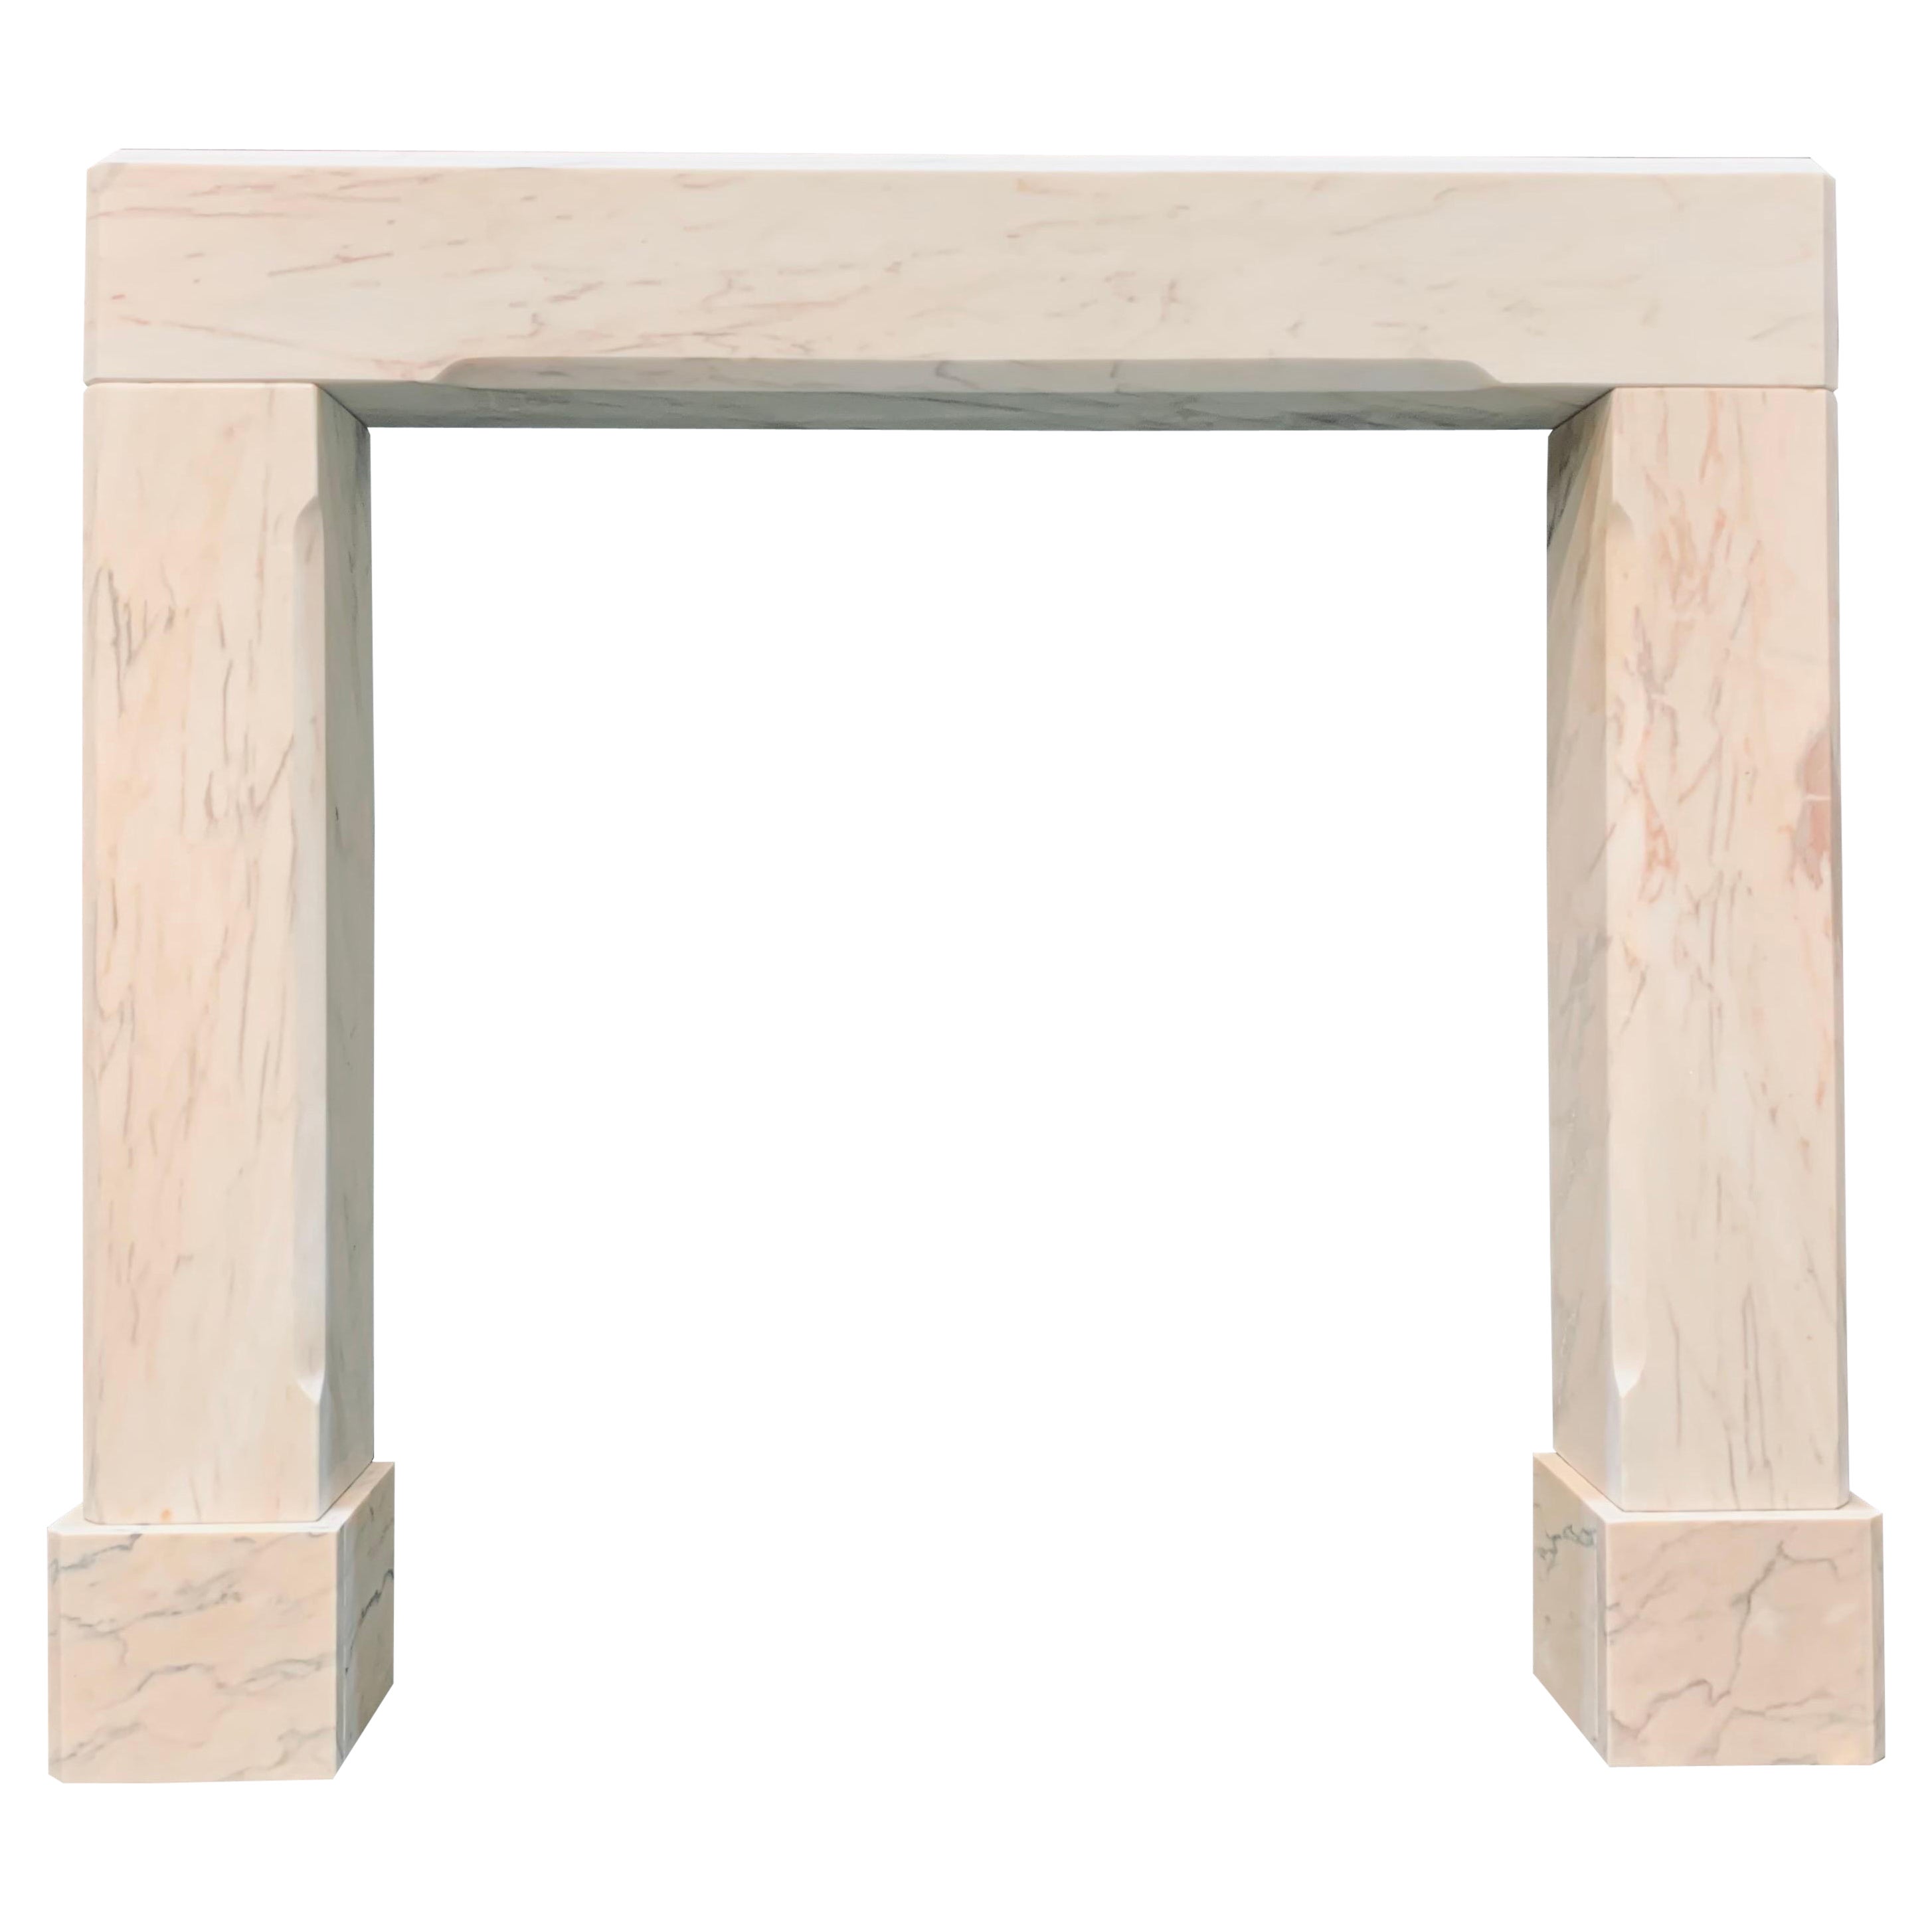 Edwardian Solid Marble Fireplace Surround